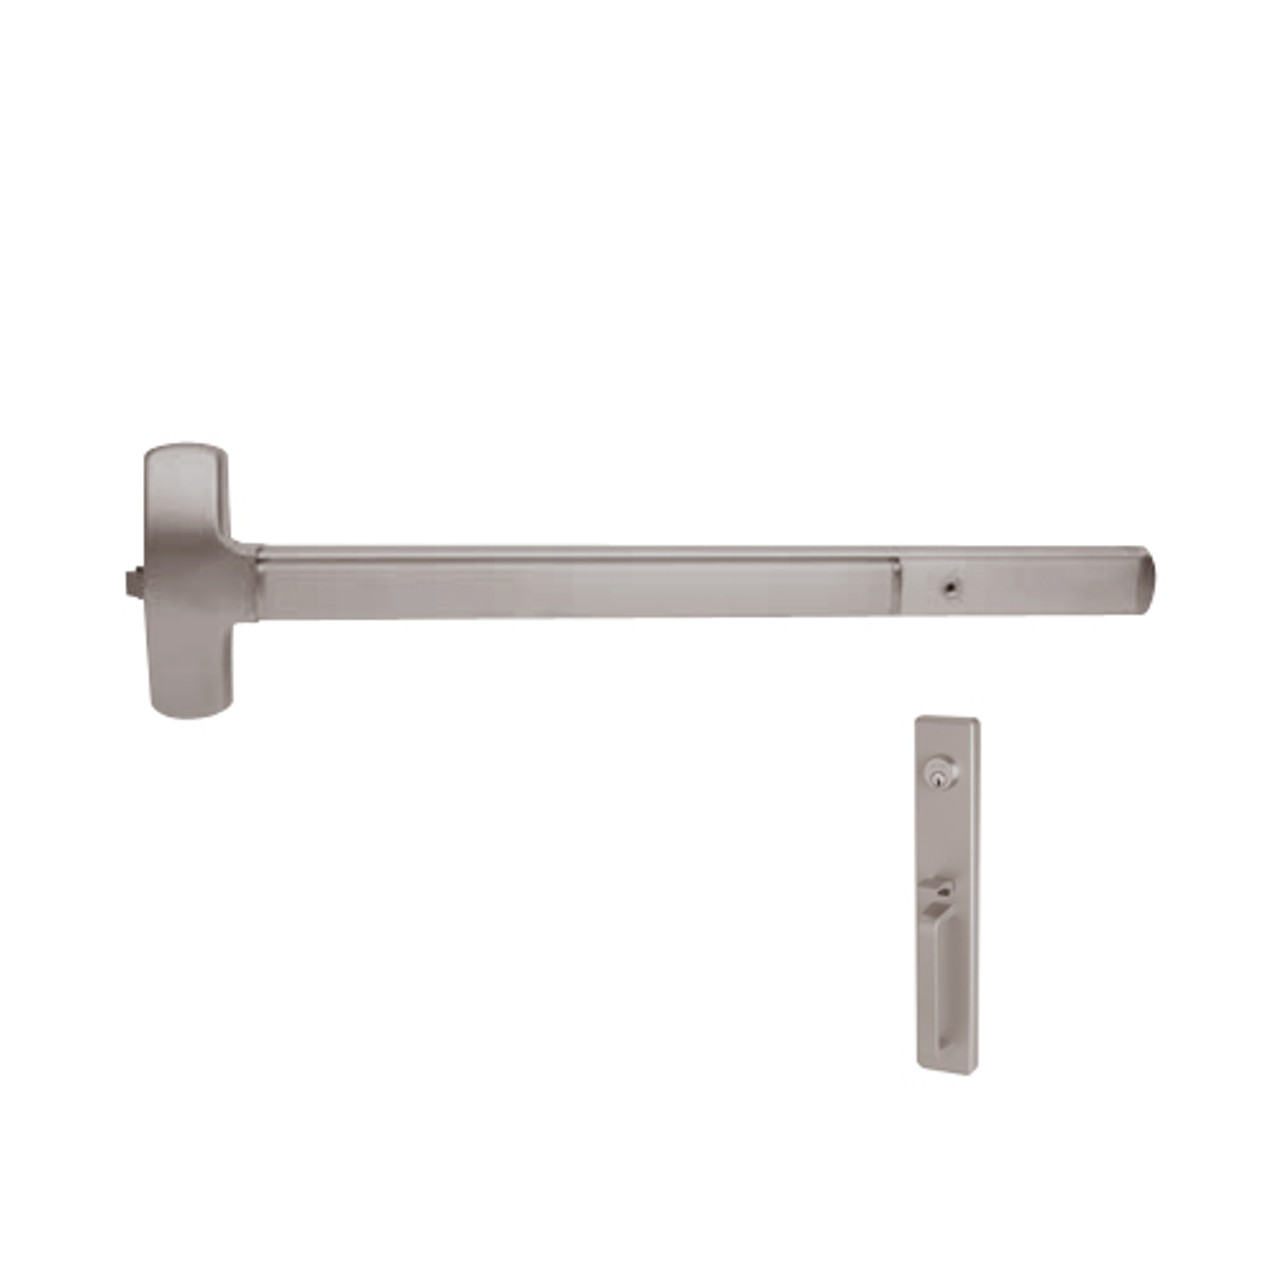 25-R-TP-US28-3 Falcon Exit Device in Anodized Aluminum